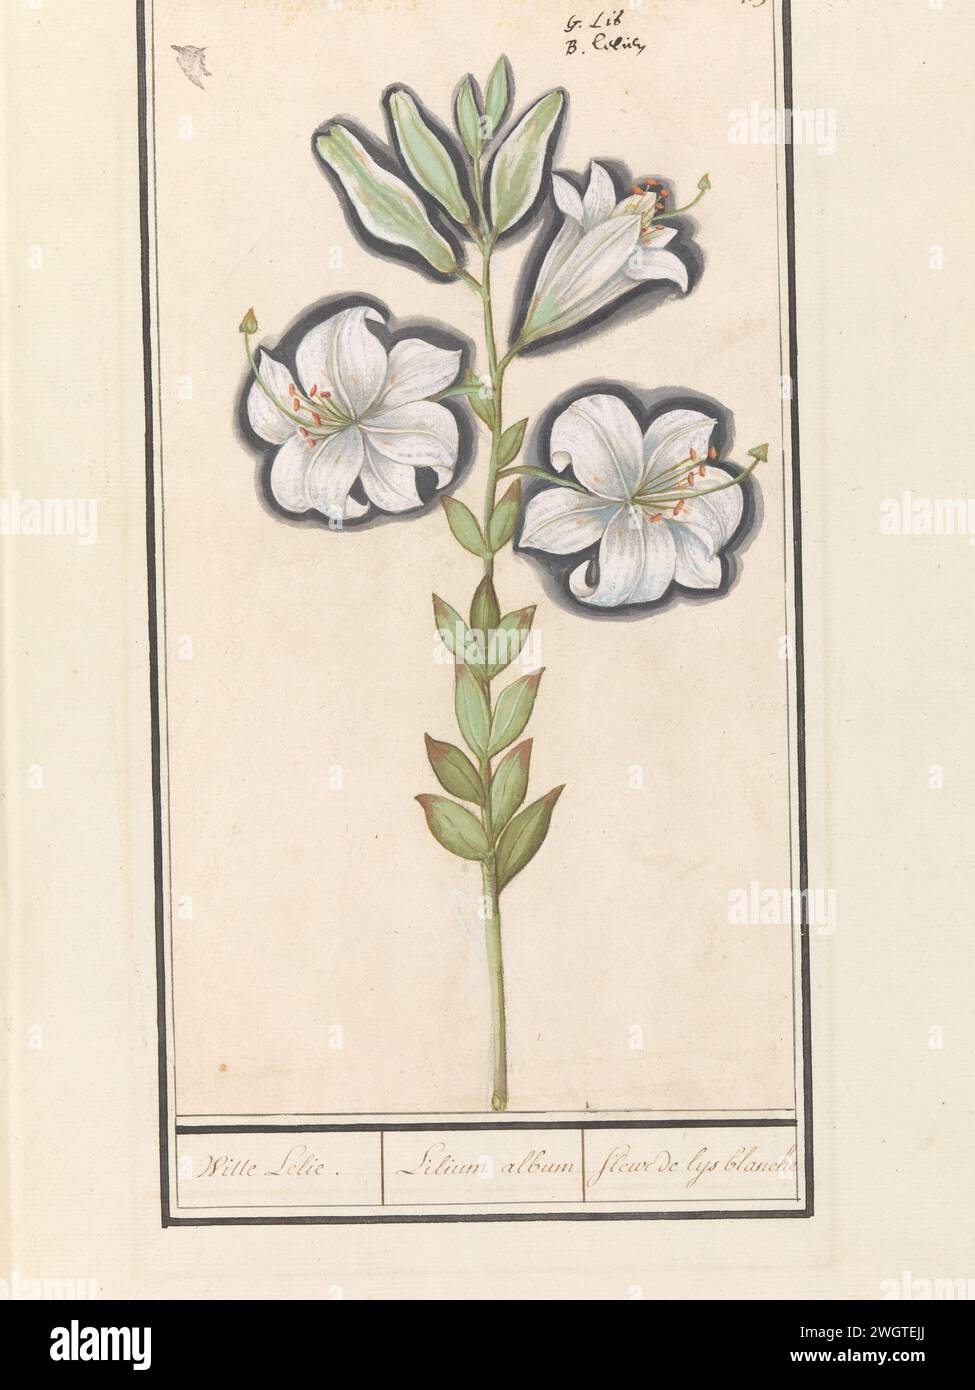 Witte Lelie (Lilium white), Anselm Bootius of Boodt, 1596 - 1610 drawing White lily. Numbered at the top right: 179. At the top of the name in two languages. Part of the second album with drawings of flowers and plants. Ninth of twelve albums with drawings of animals, birds and plants known around 1600, made commissioned by Emperor Rudolf II. With explanation in Dutch, Latin and French. draughtsman: Praagdraughtsman: Delft paper. watercolor (paint). deck paint. chalk. ink brush / pen flowers: lily Stock Photo